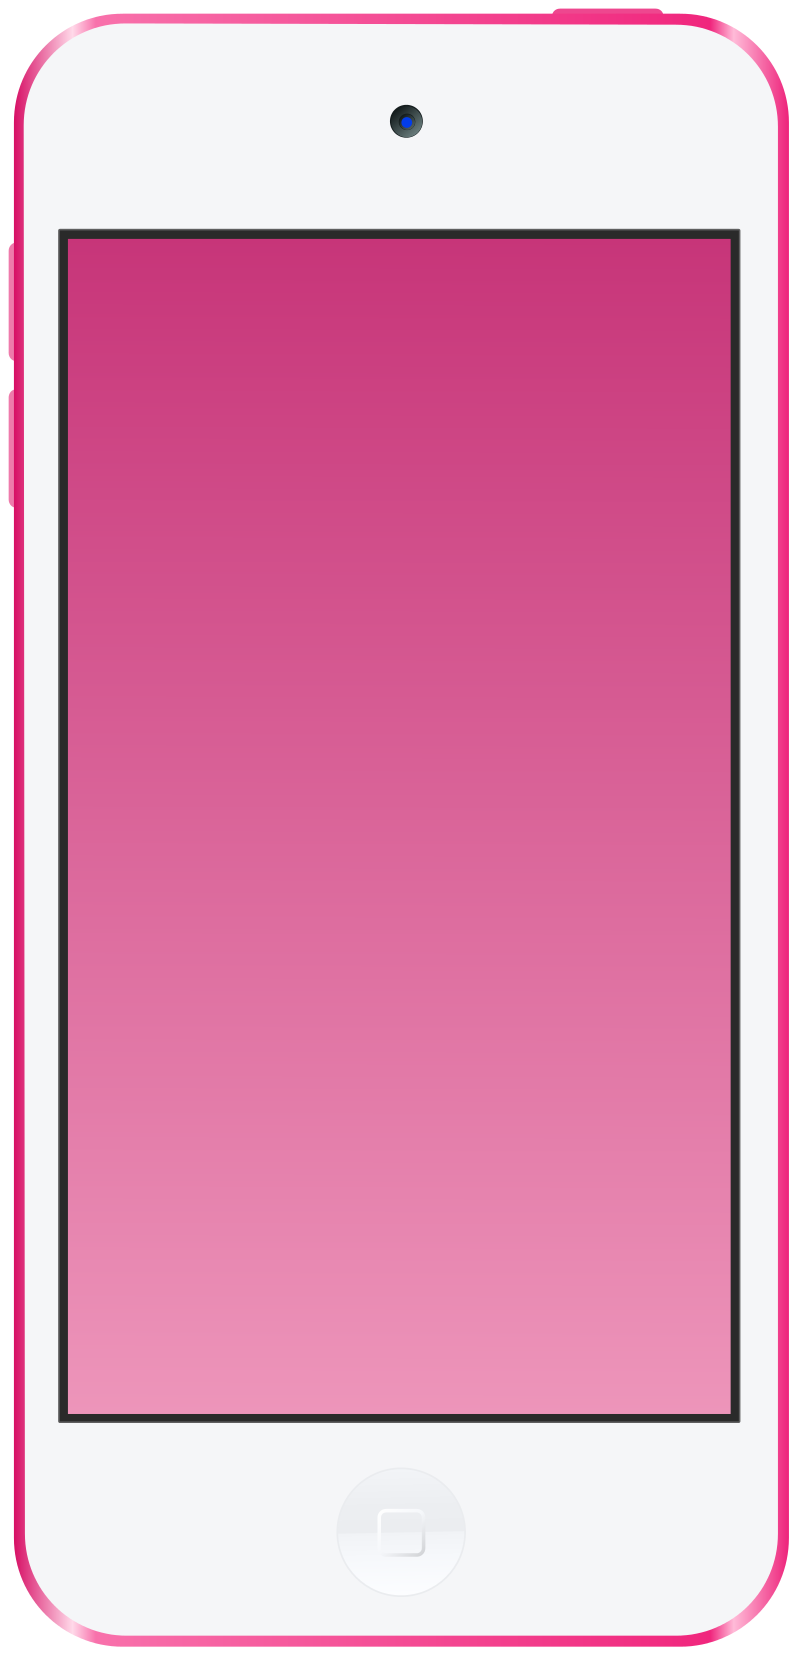 iPod Touch home screen